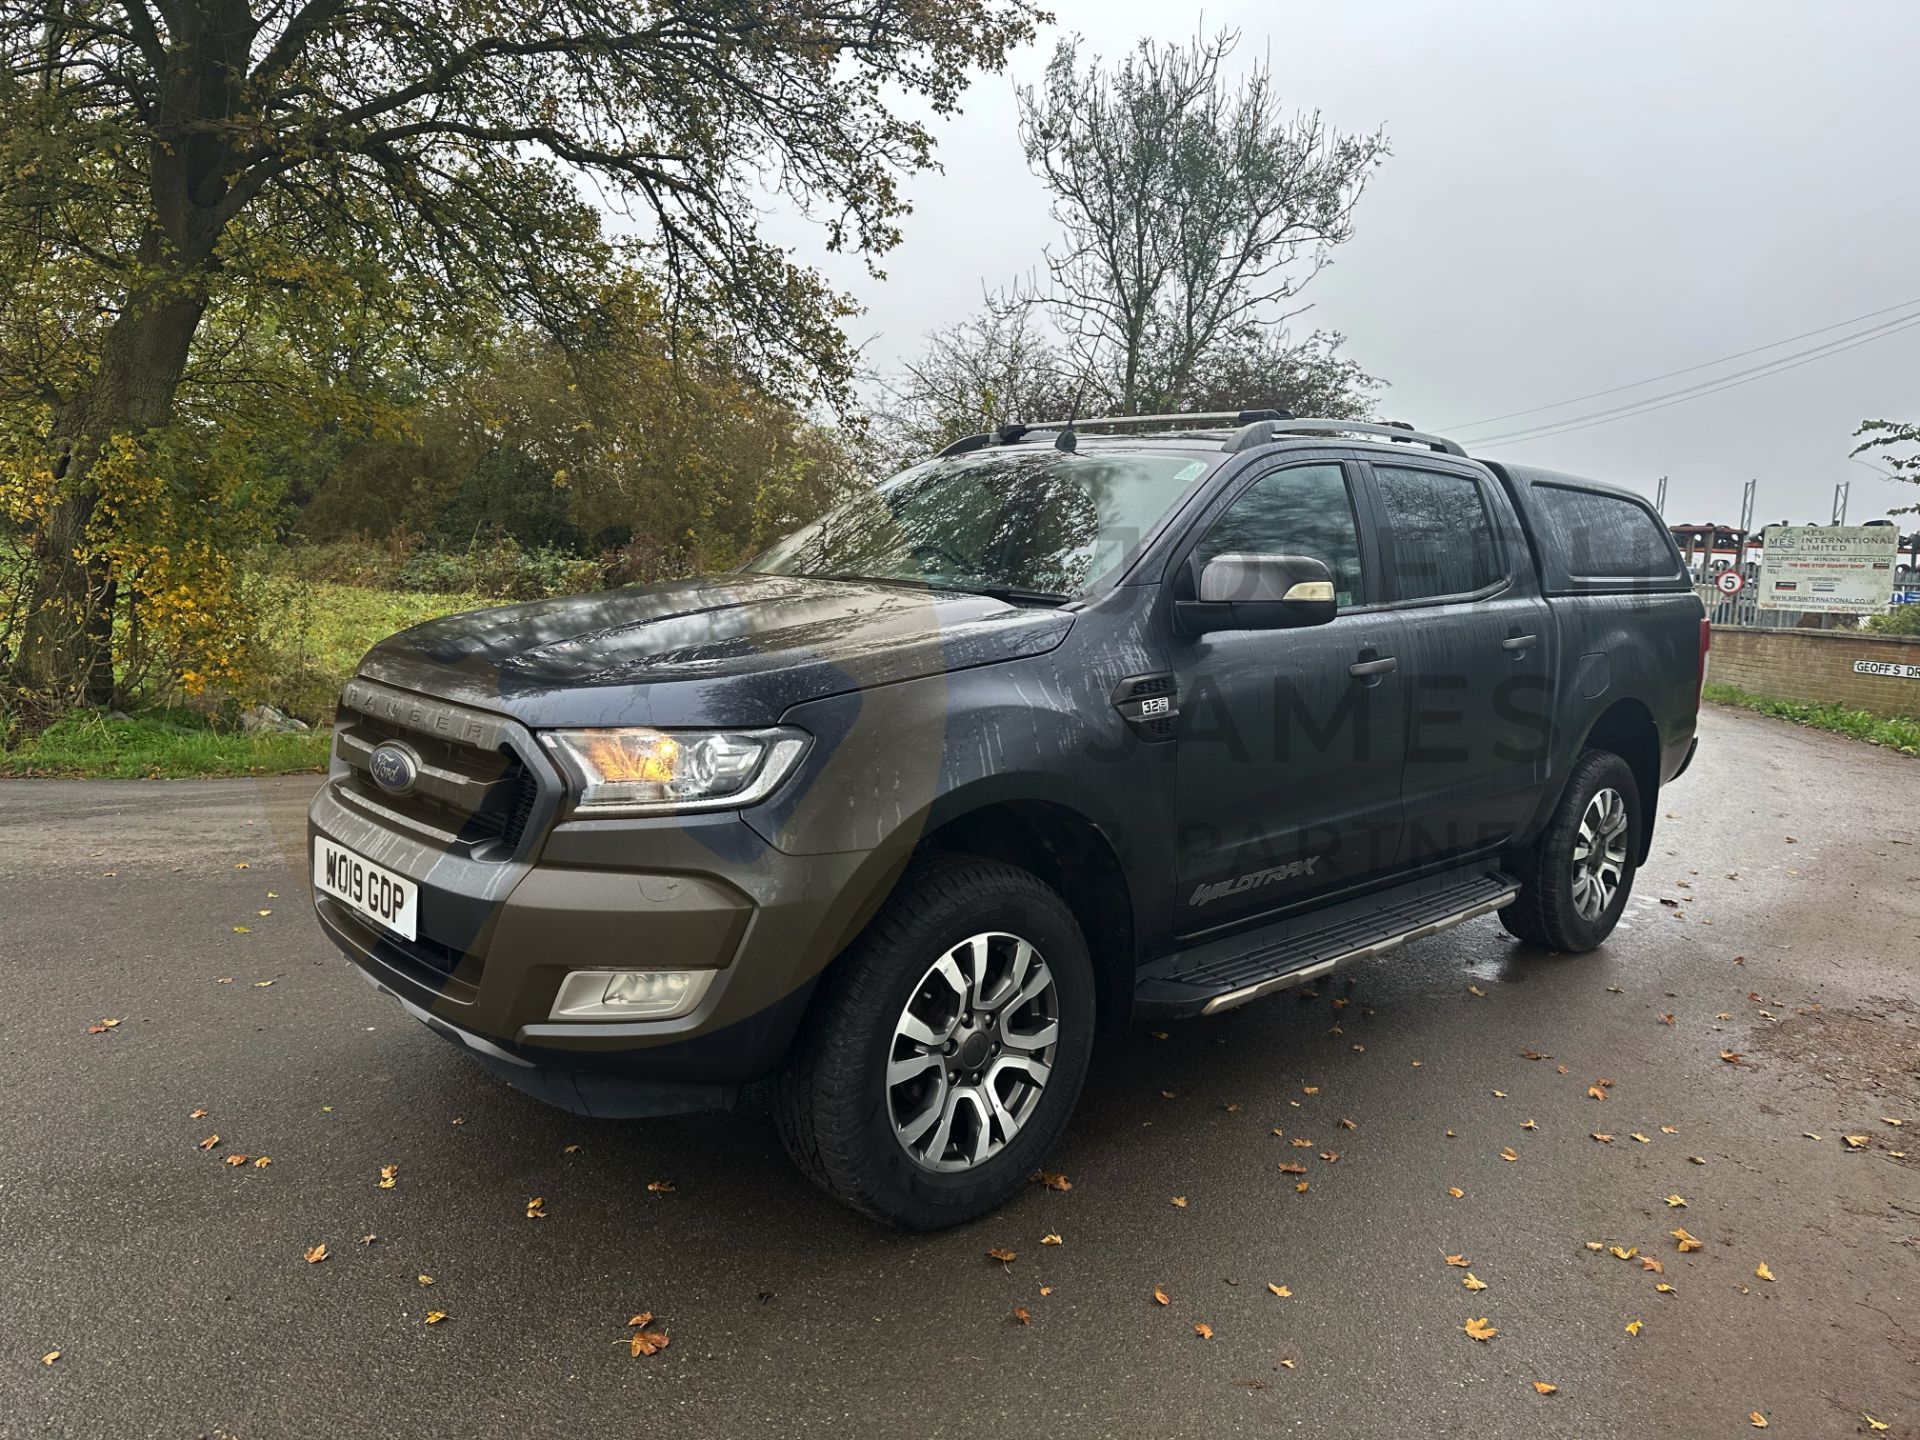 FORD RANGER *WILDTRAK EDITION* DOUBLE CAB PICK-UP (2019 - EURO 6) 3.2 TDCI - AUTOMATIC (1 OWNER) - Image 6 of 52